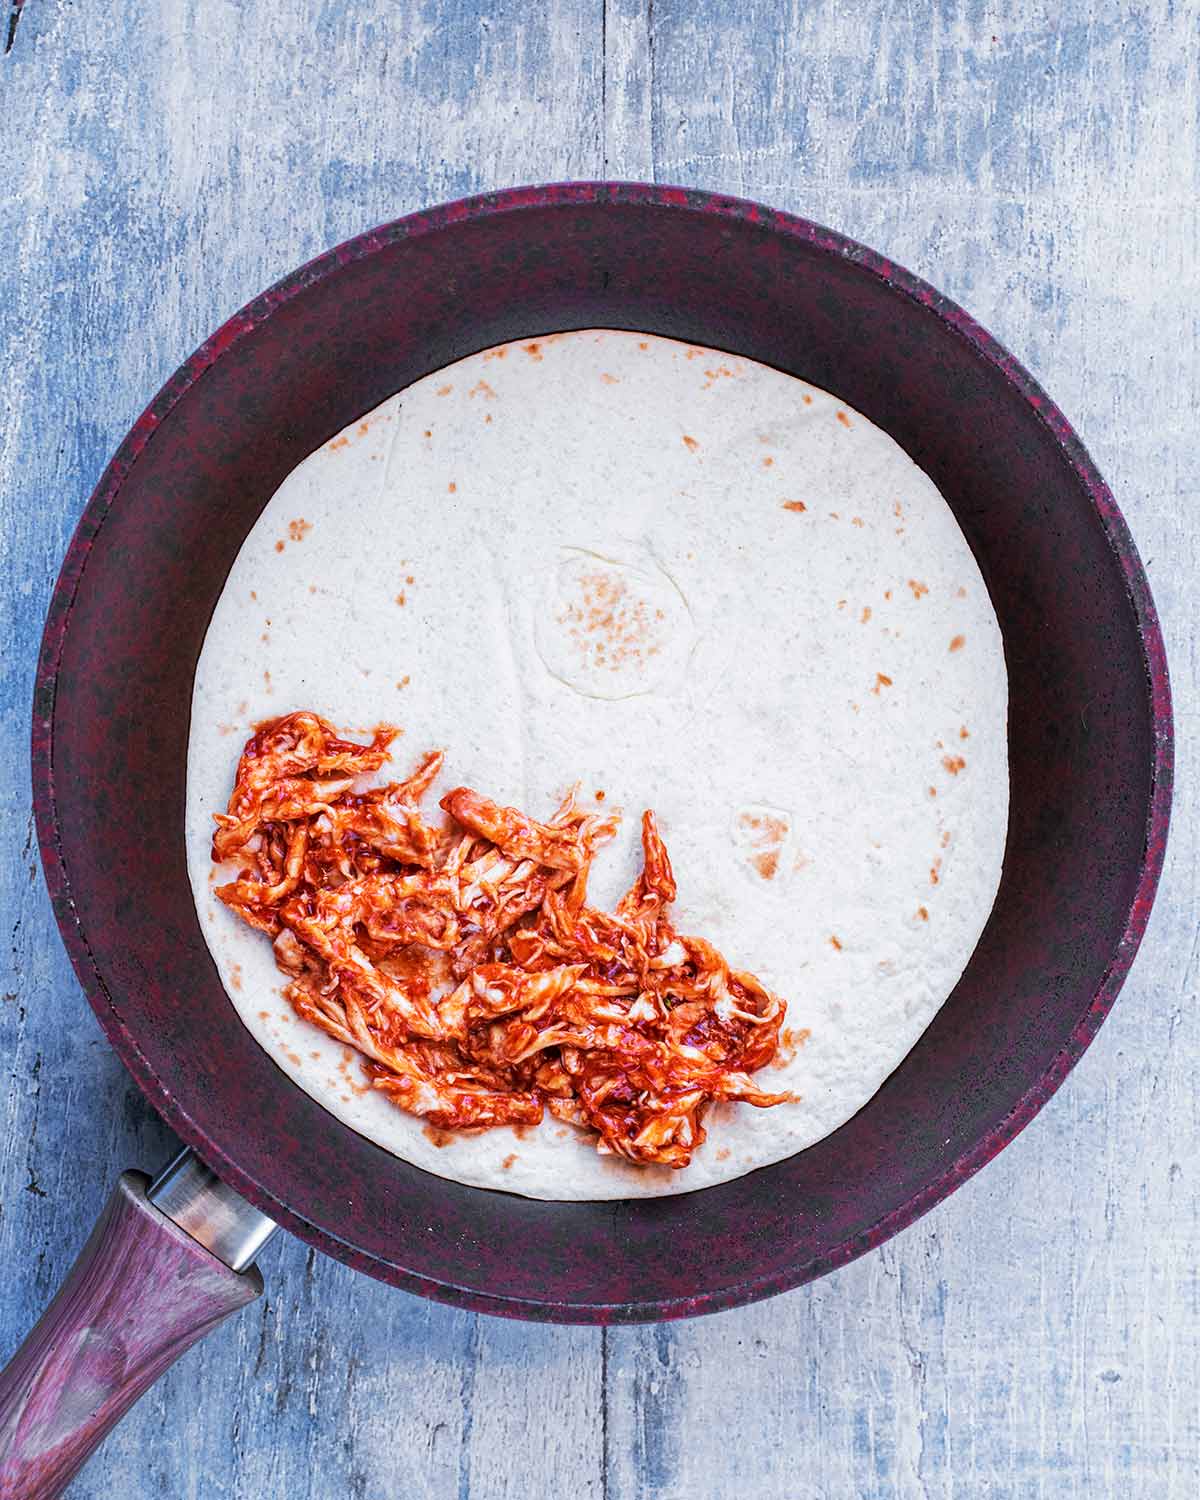 A flour tortilla in a frying pan with barbecue chicken on half of it.